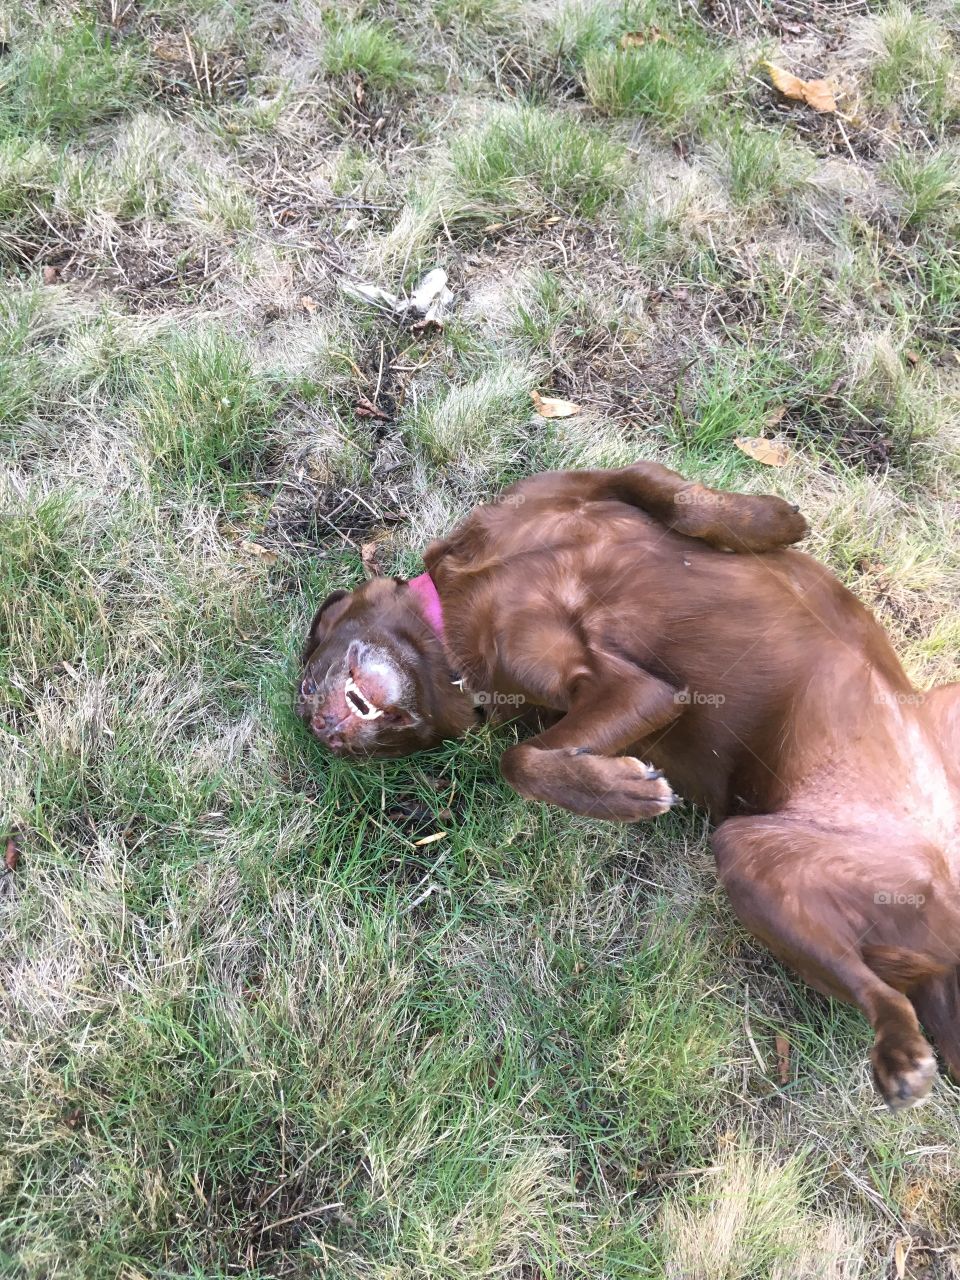 Rolling in the grass.